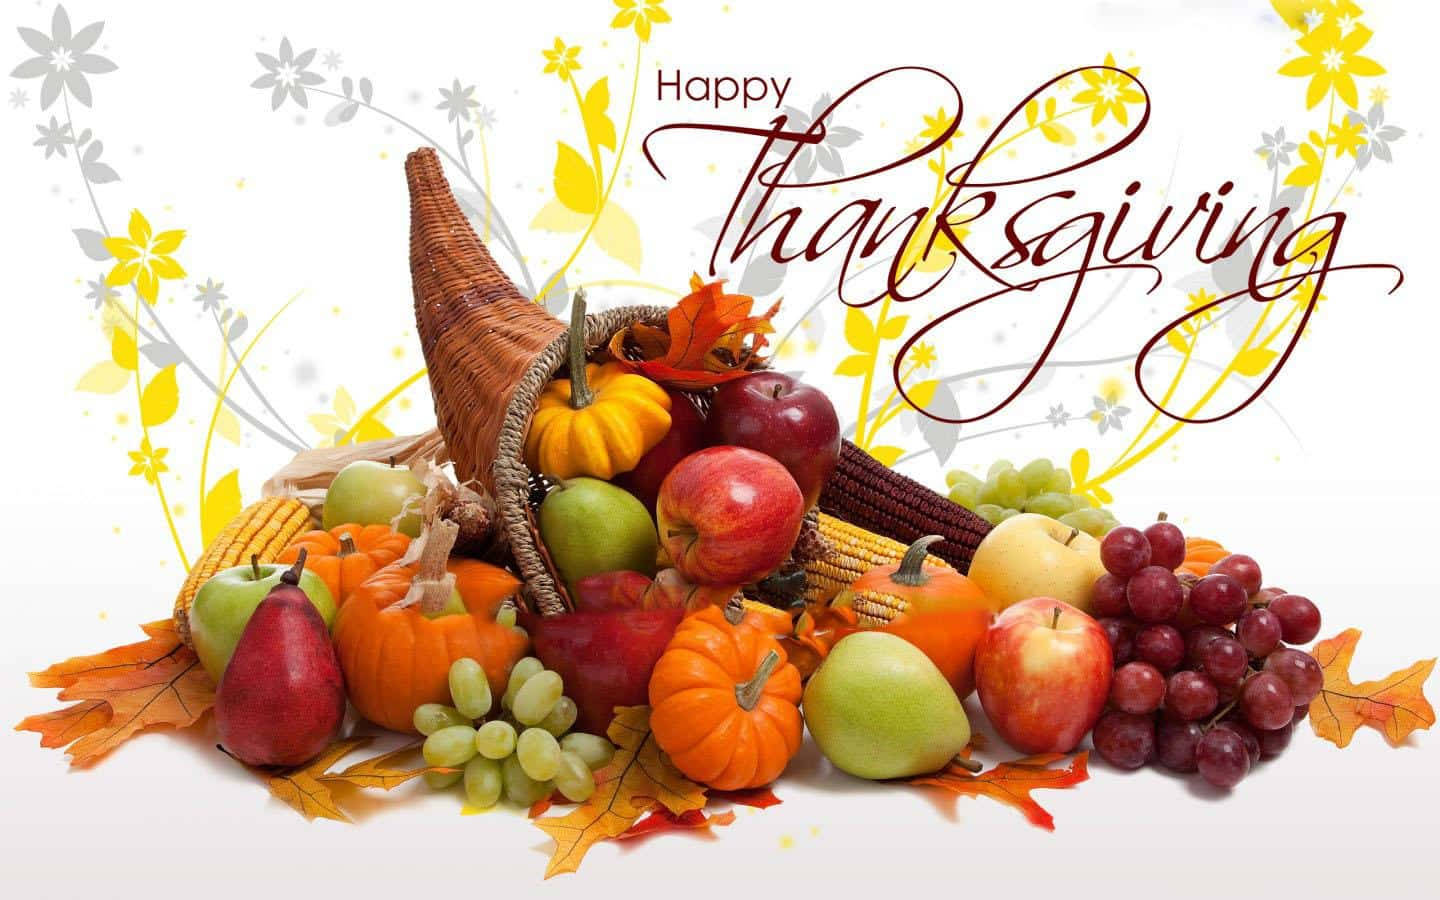 Enjoy the season with a plate of Thanksgiving fruits! Wallpaper